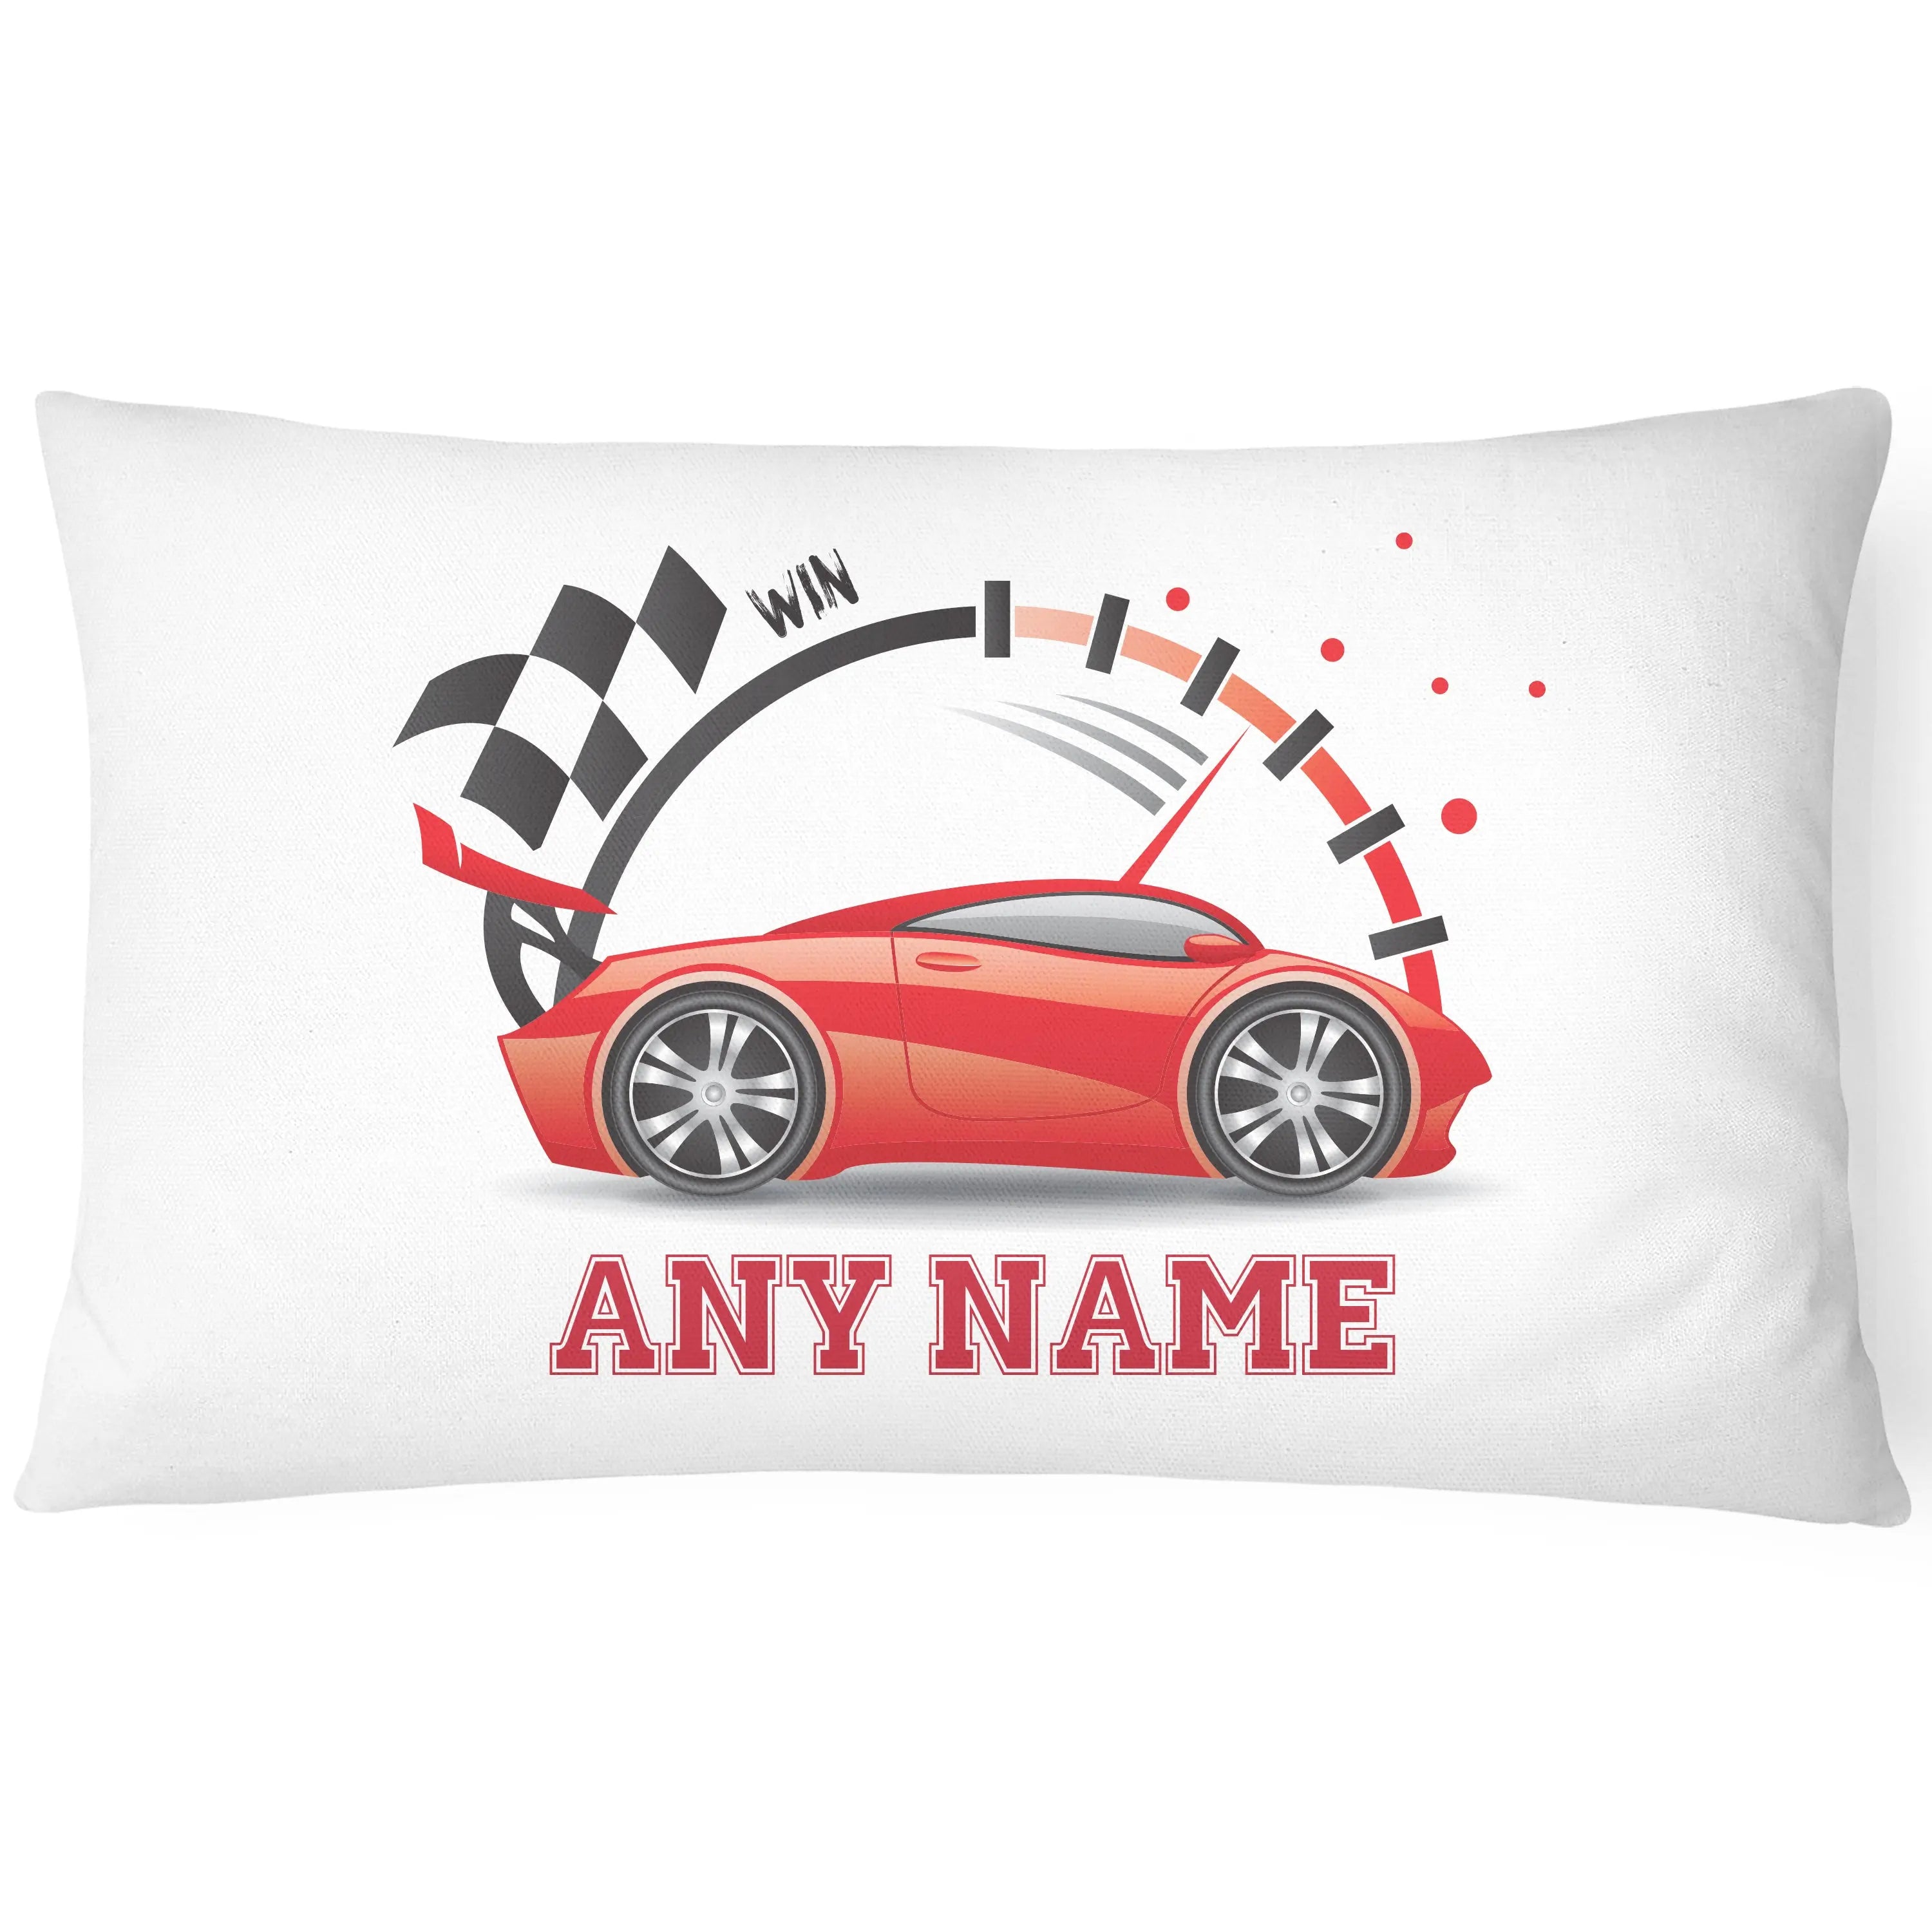 Race Car Pillowcase for Kids - Personalise With Any Name - Perfect Children's Gift - Racer - CushionPop